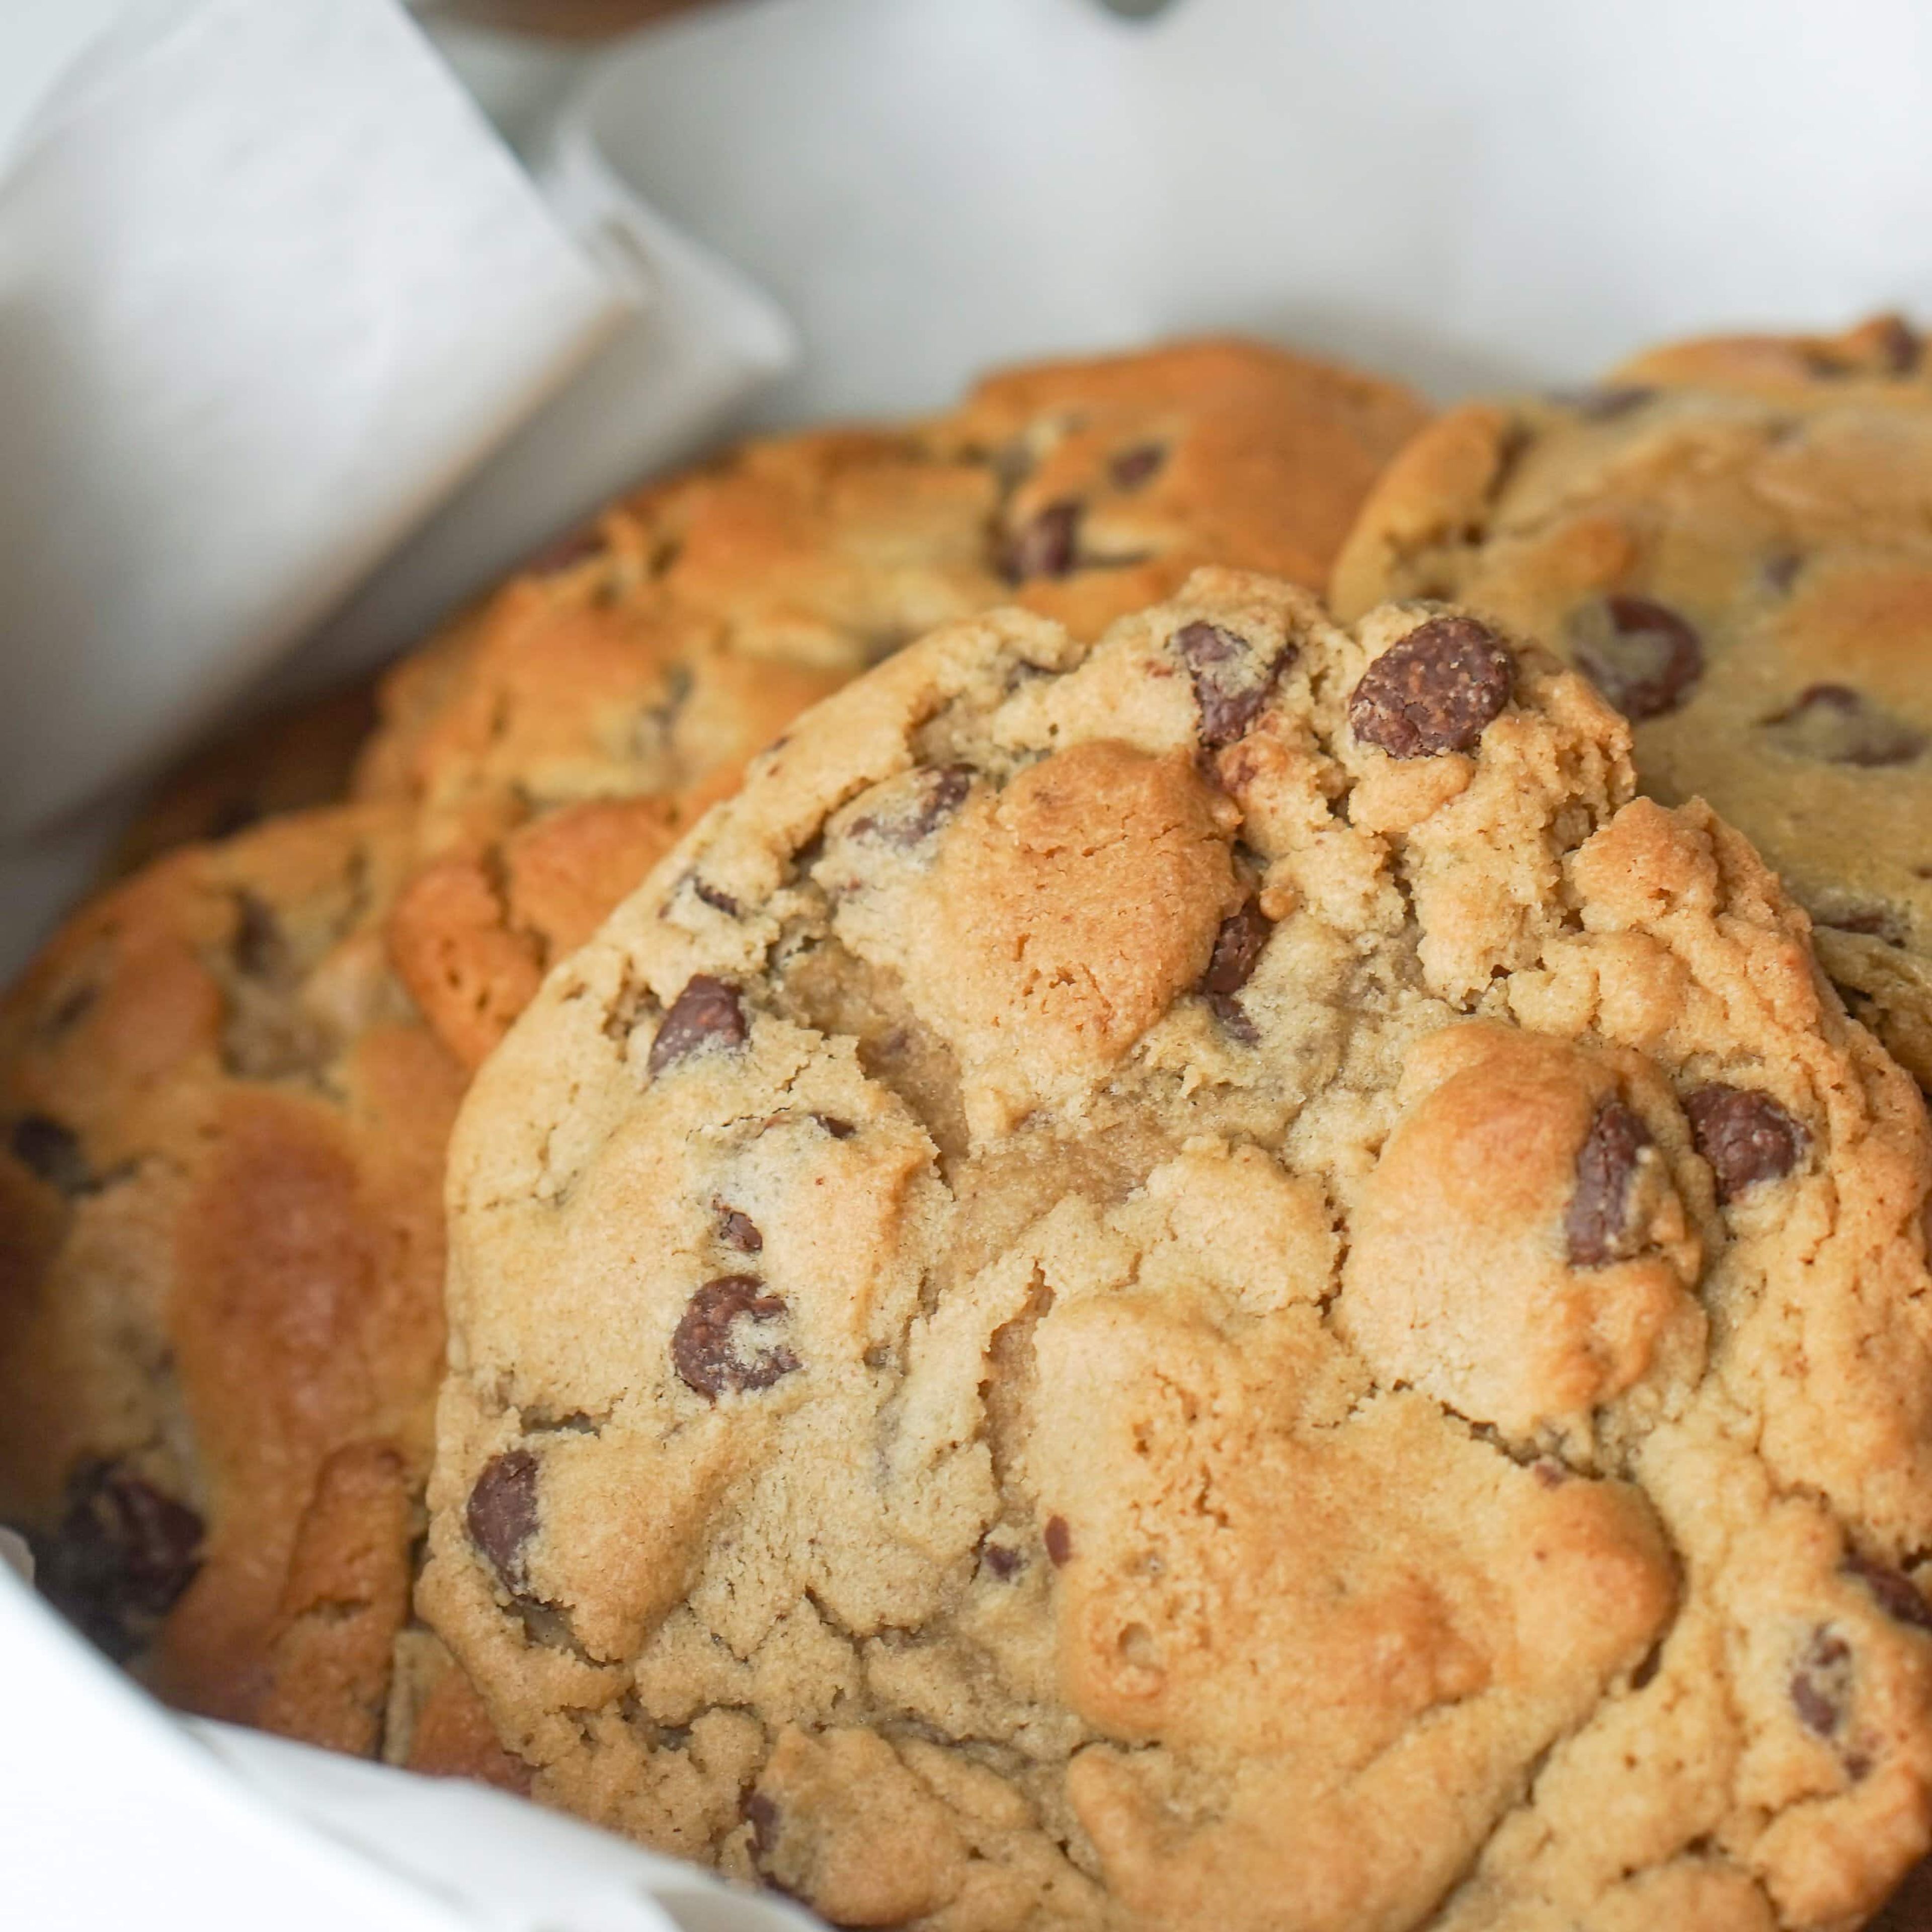 Famous Chocolate Chip Cookies - 12 ct.